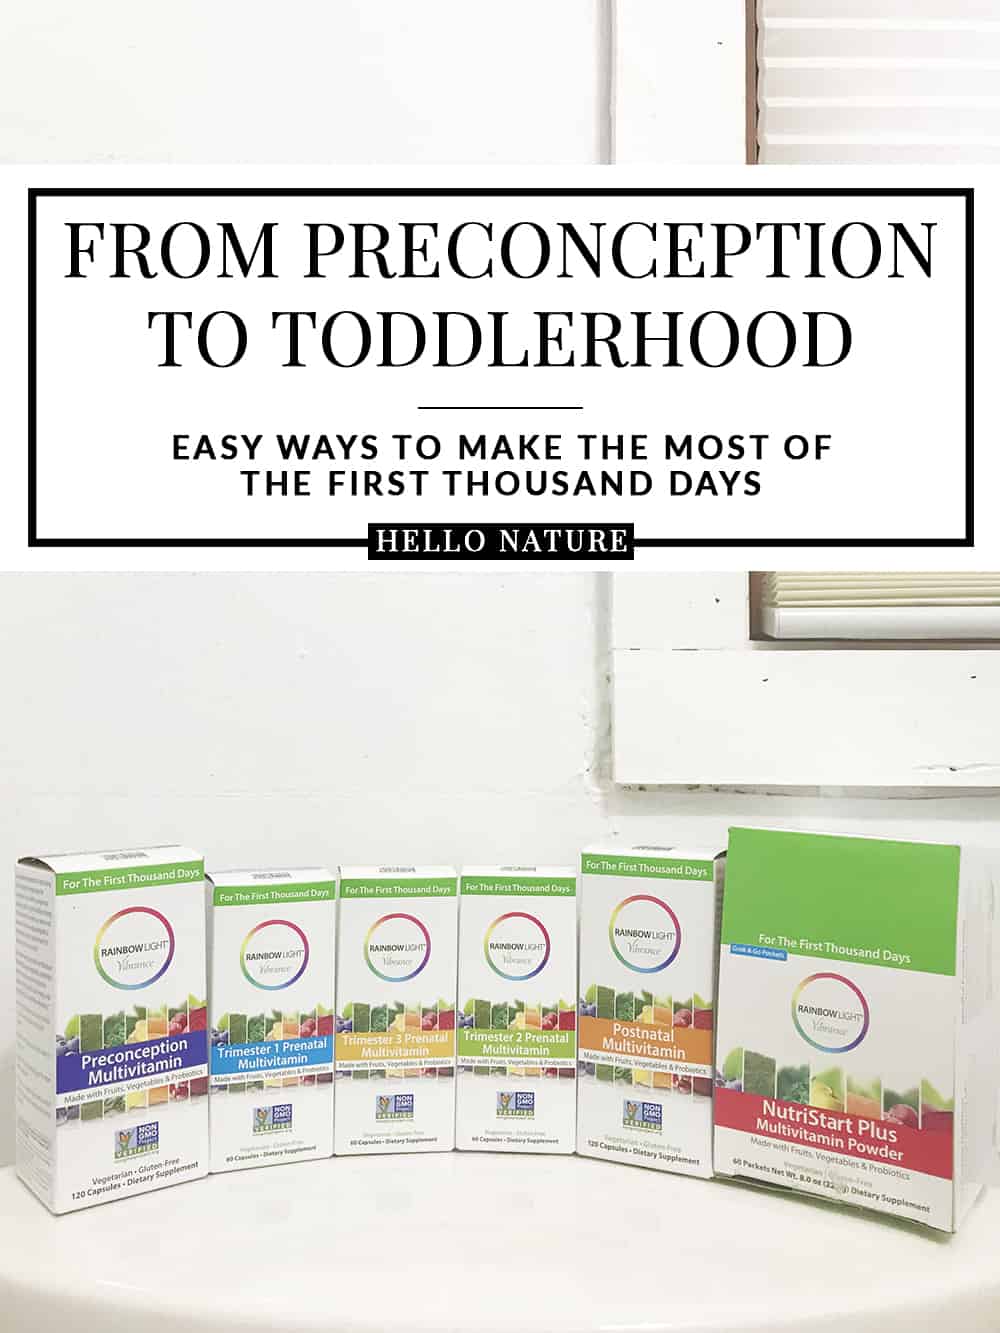 Life doesn't have to be as complicated as we make it, especially when we're welcoming that bundle of joy into our life. Use these ideas to simplify the time between preconception and toddlerhood. #FirstThousandDays #Prenatal #MomLife #Postnatal #Pregnancy